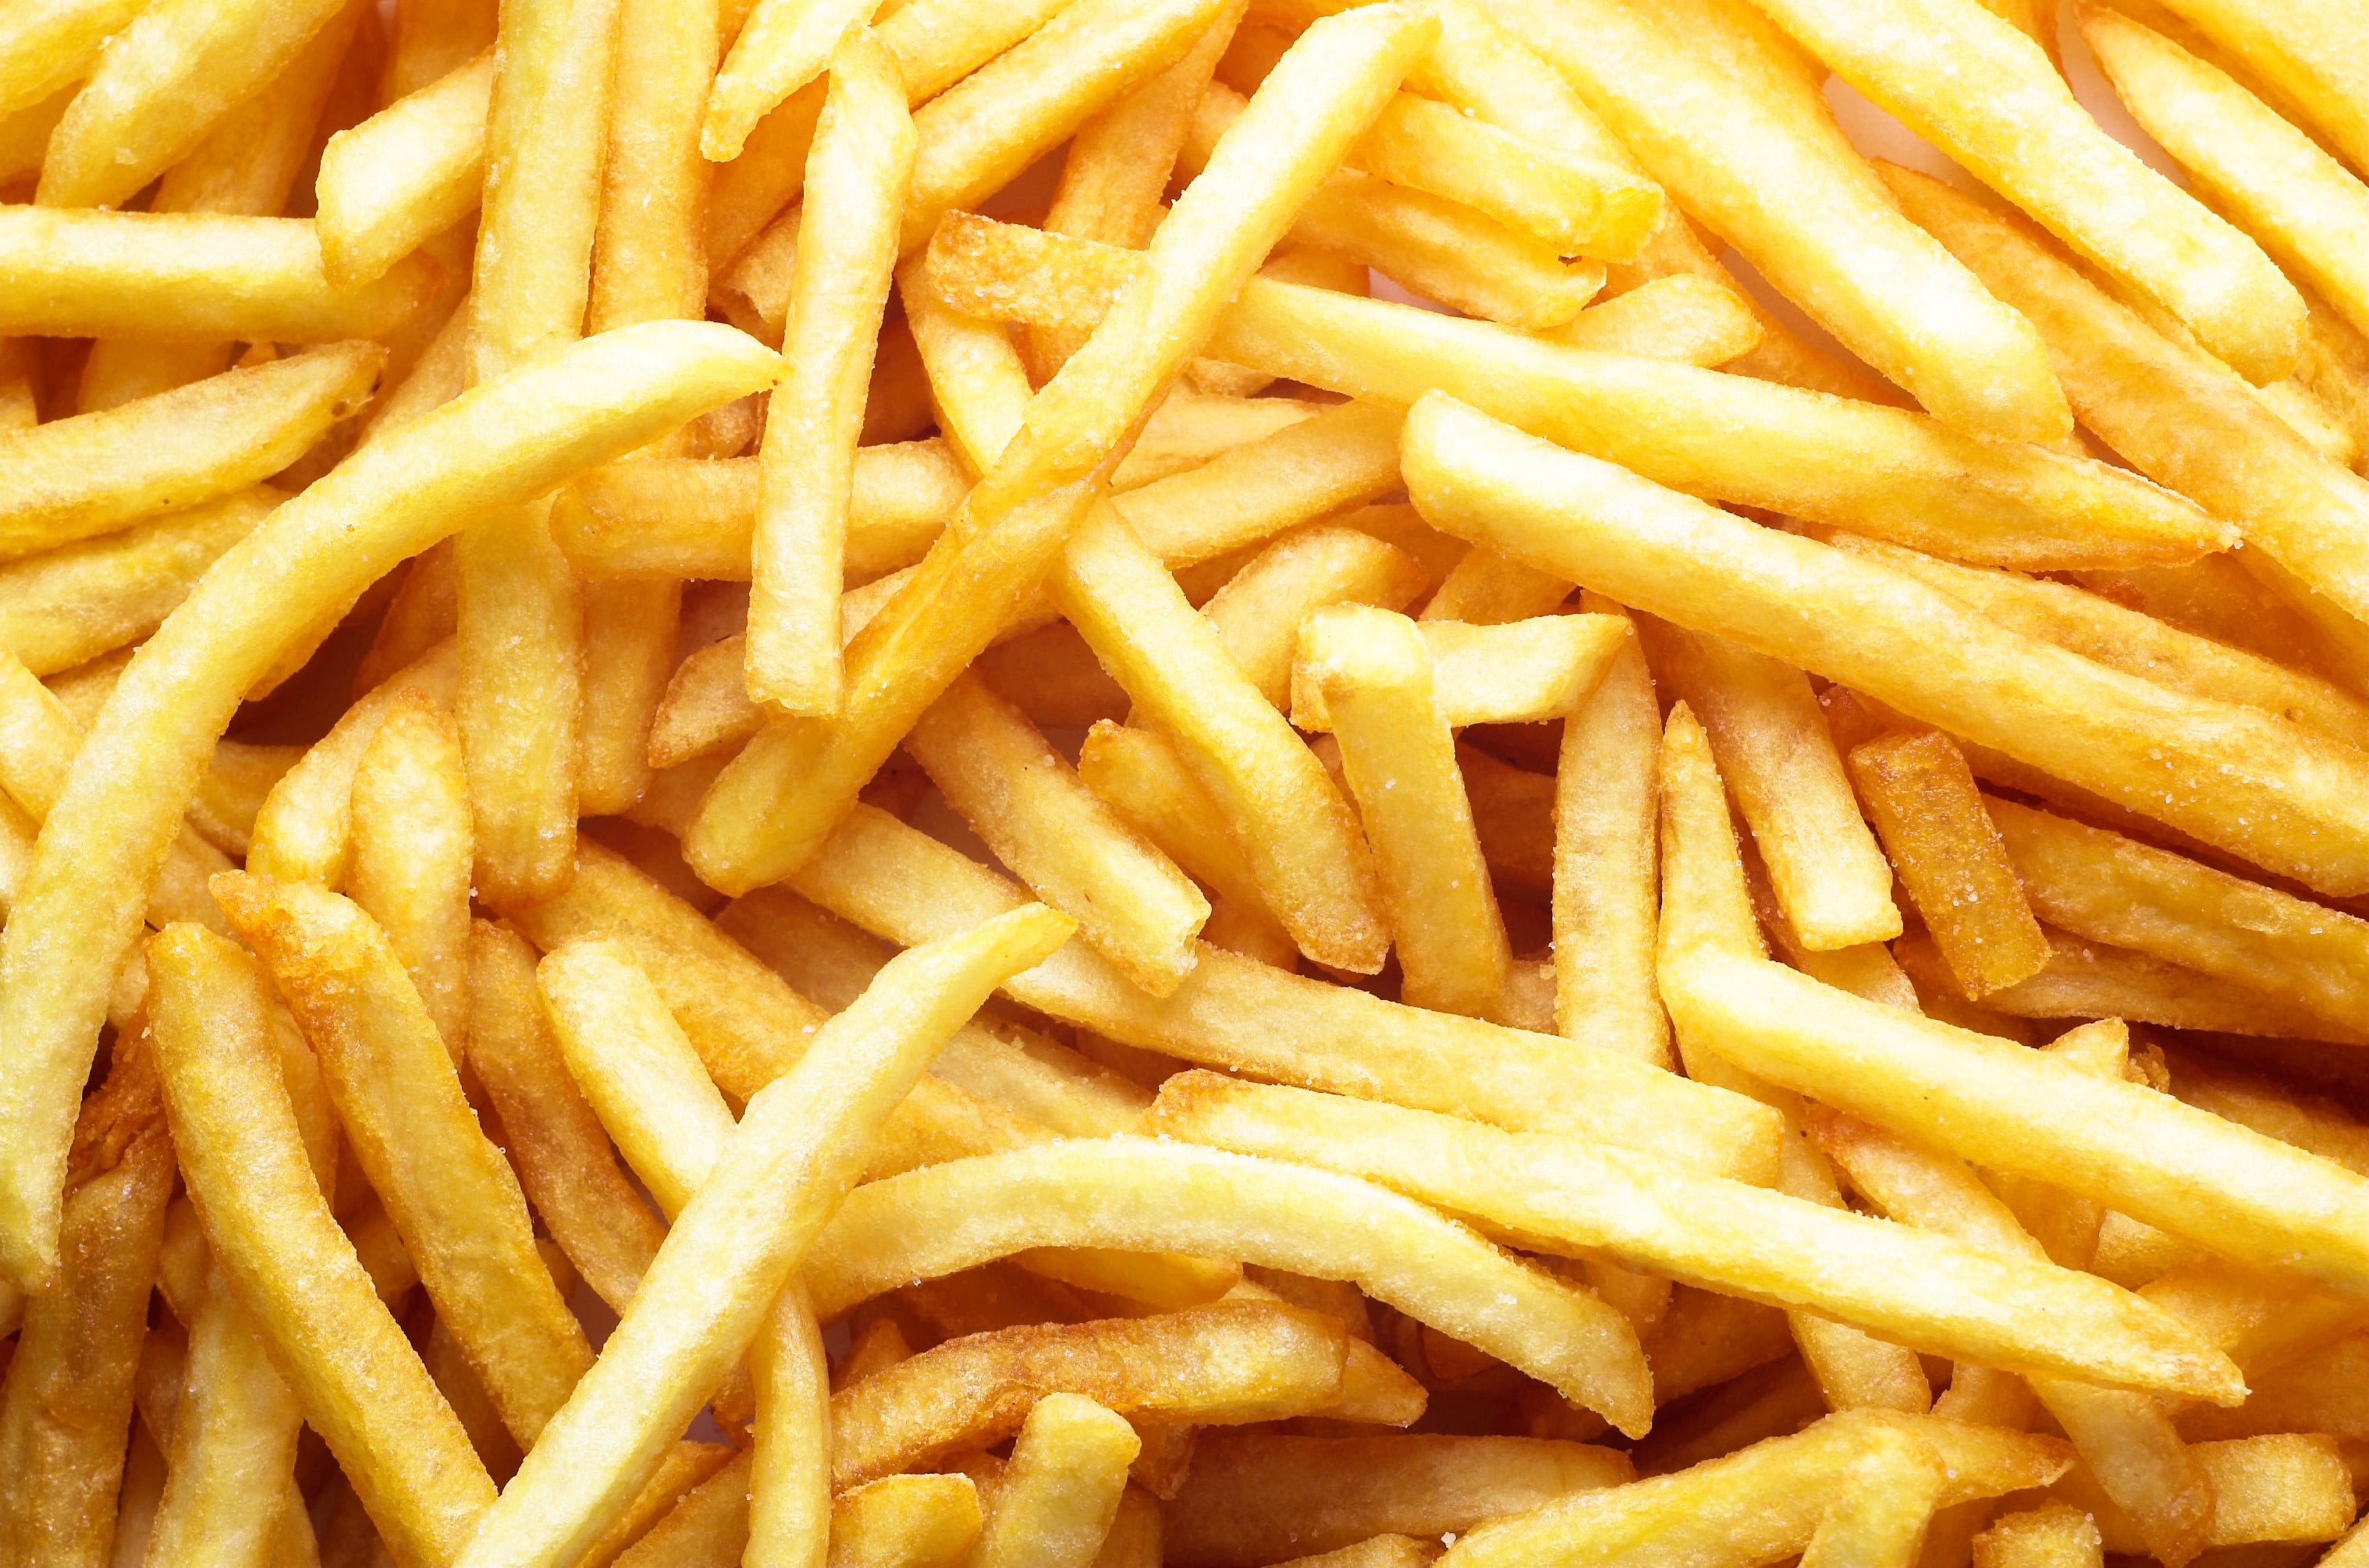 It’s National French Fry Day. Who has the best french fries in the Stevens Point area?